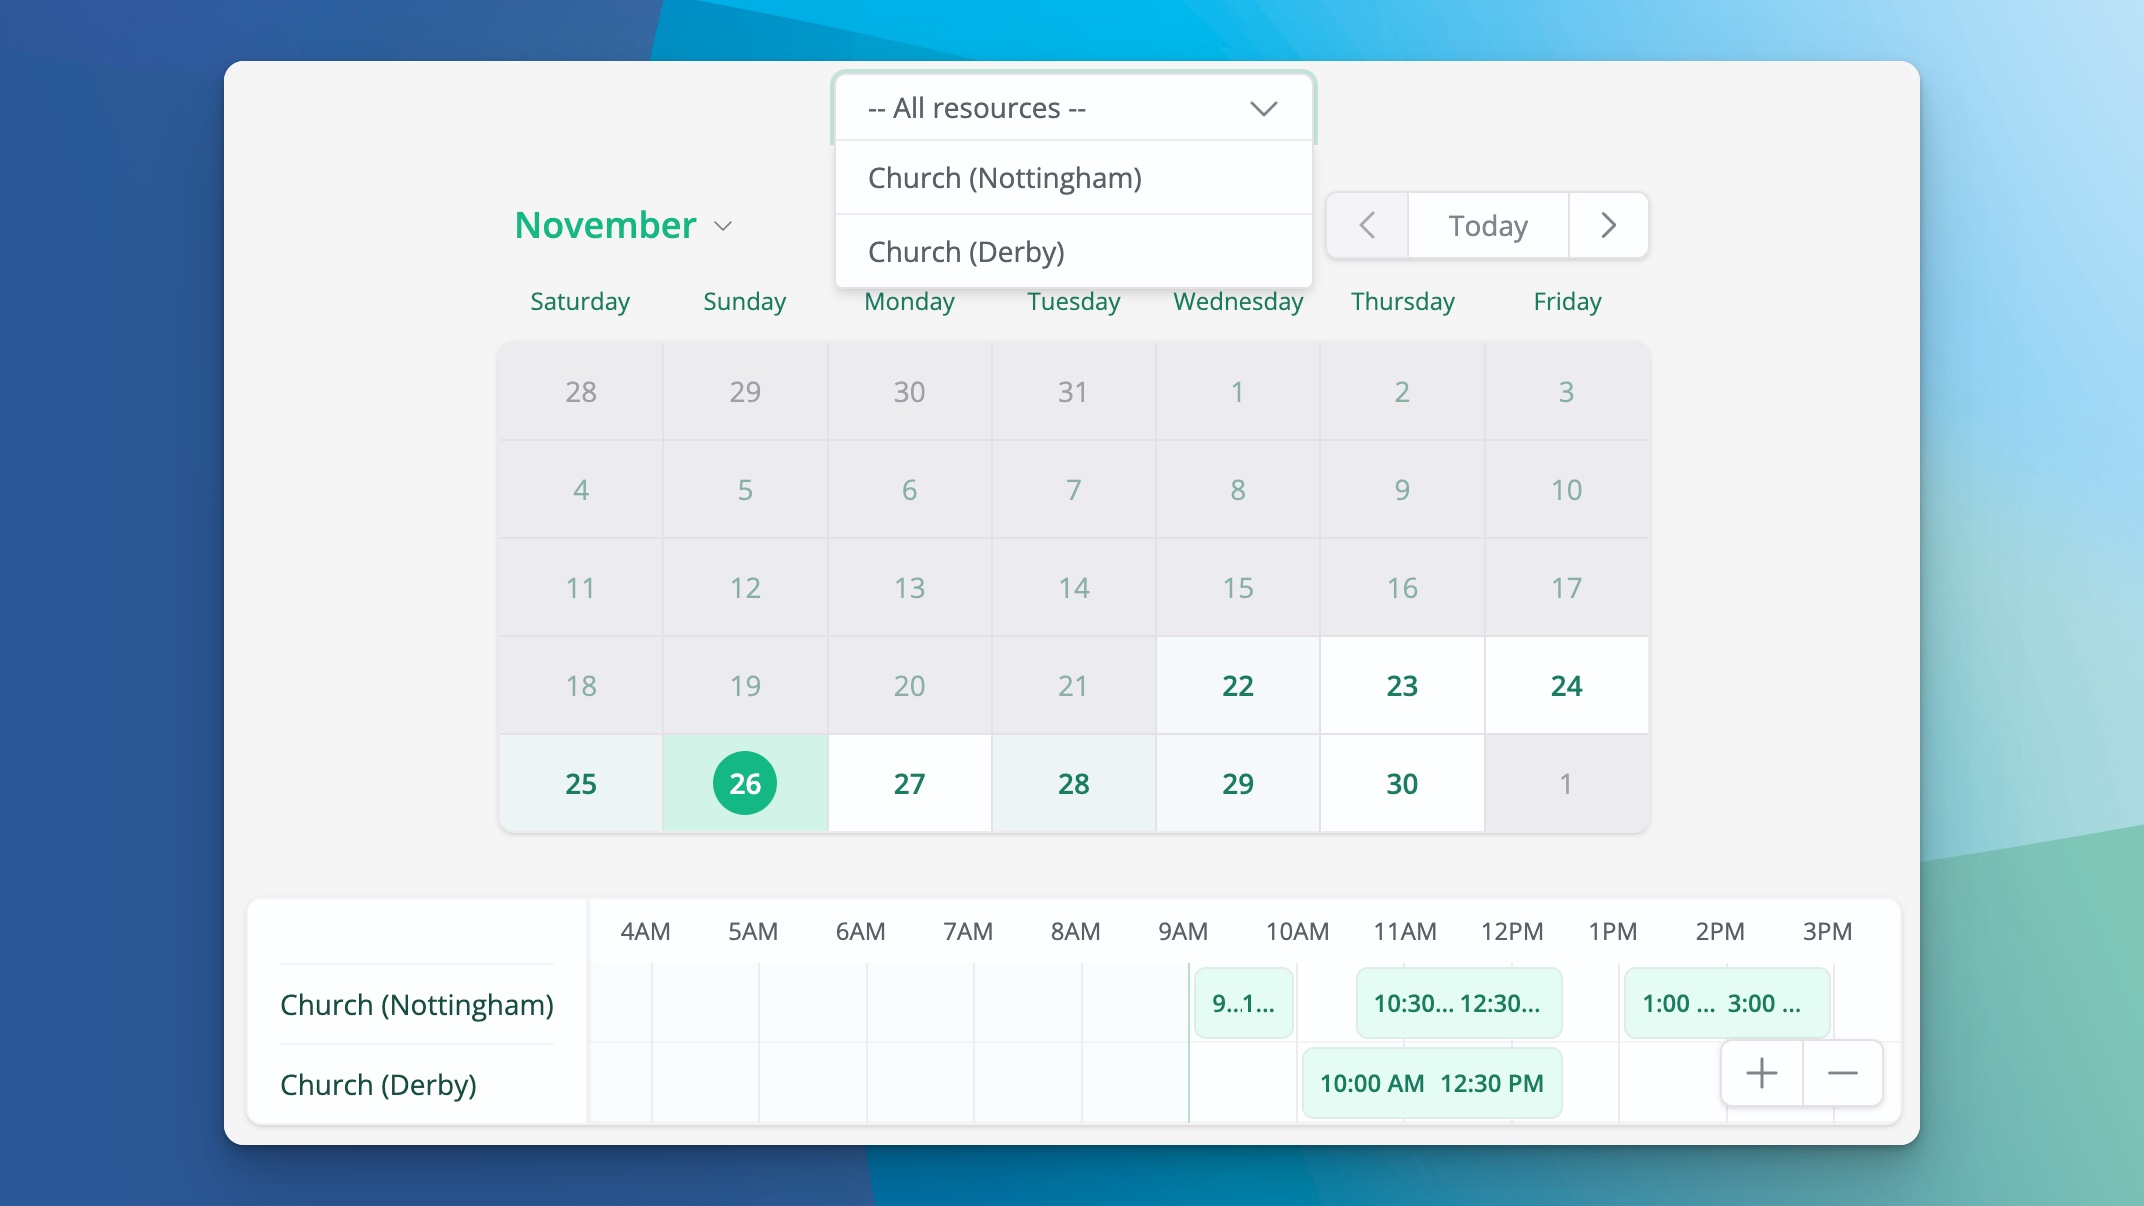 Create embed configurations for the Bookings Resource Planner